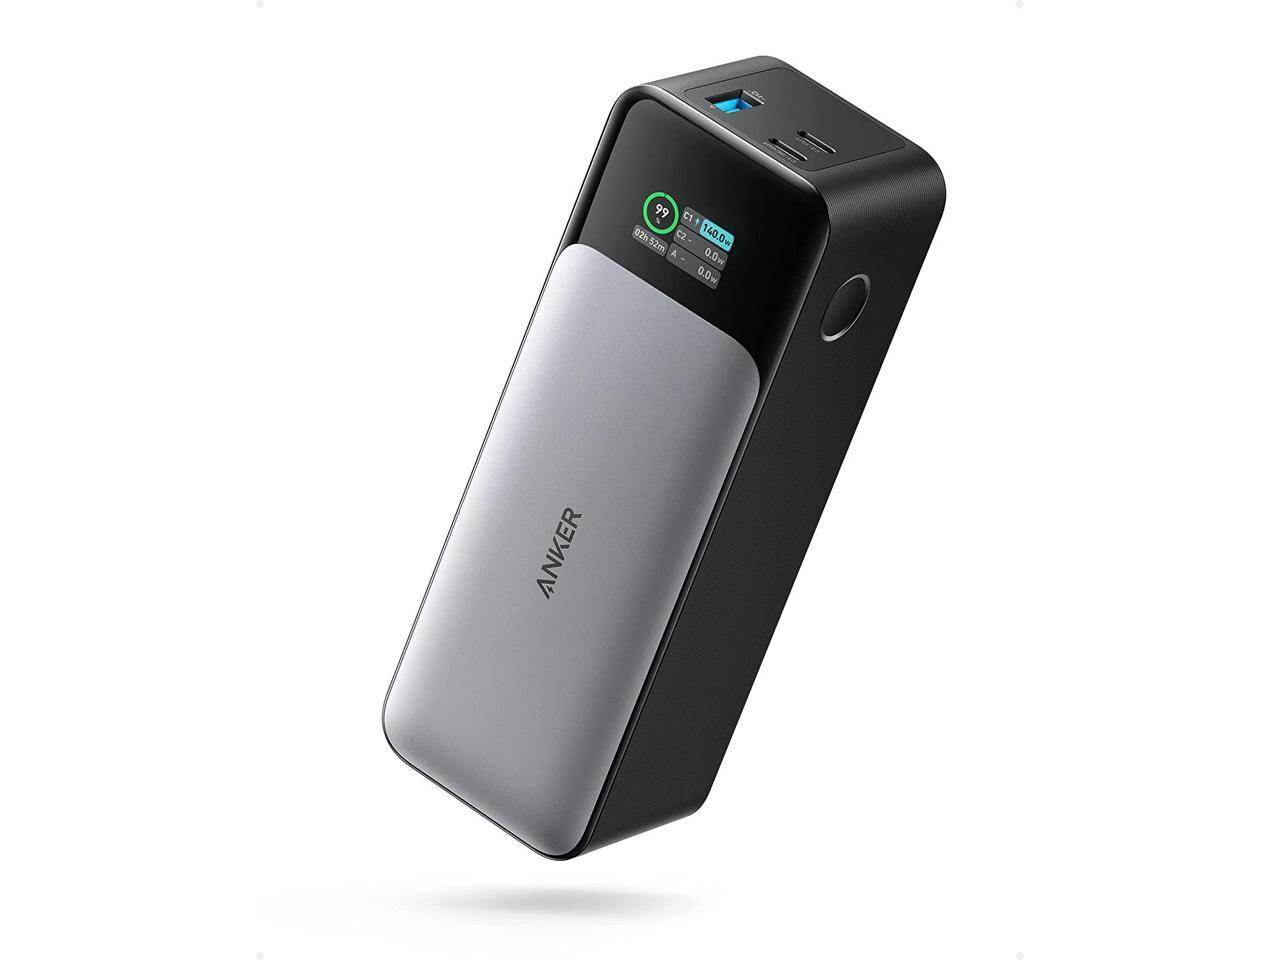 Anker 24,000mAh 737 Portable Power Bank / 3-Port Charger $82.80 w/ Affirm + Free Shipping